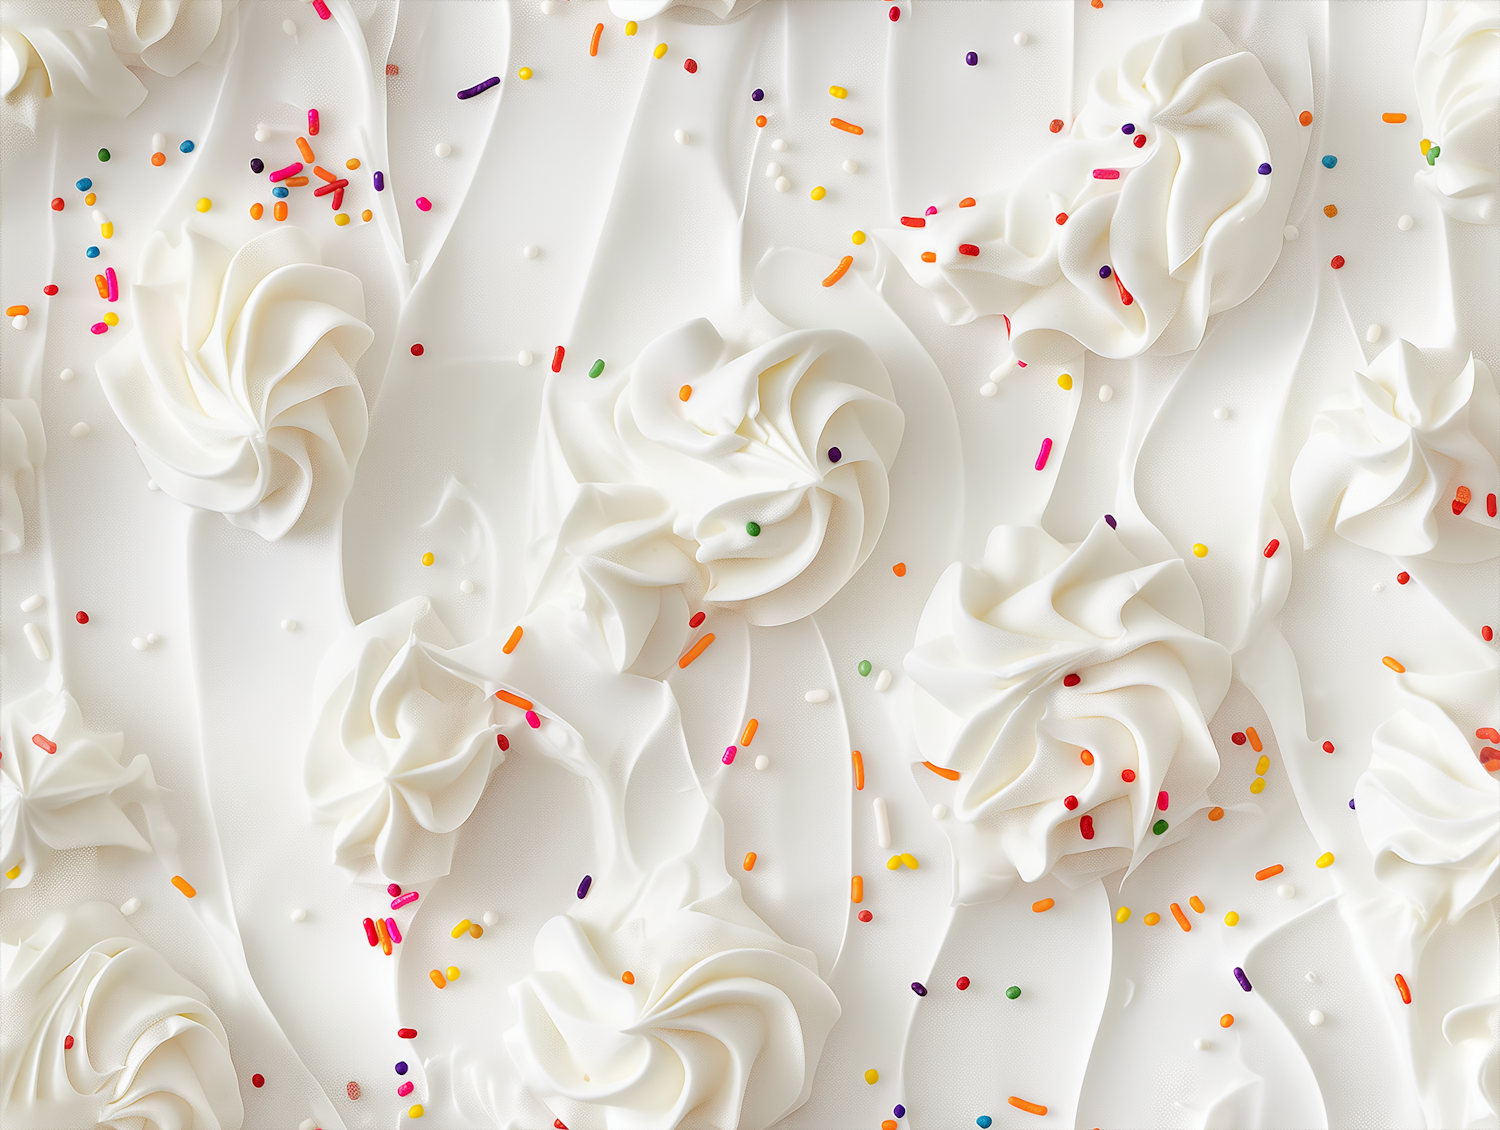 Whipped Cream Peaks with Candy Sprinkles